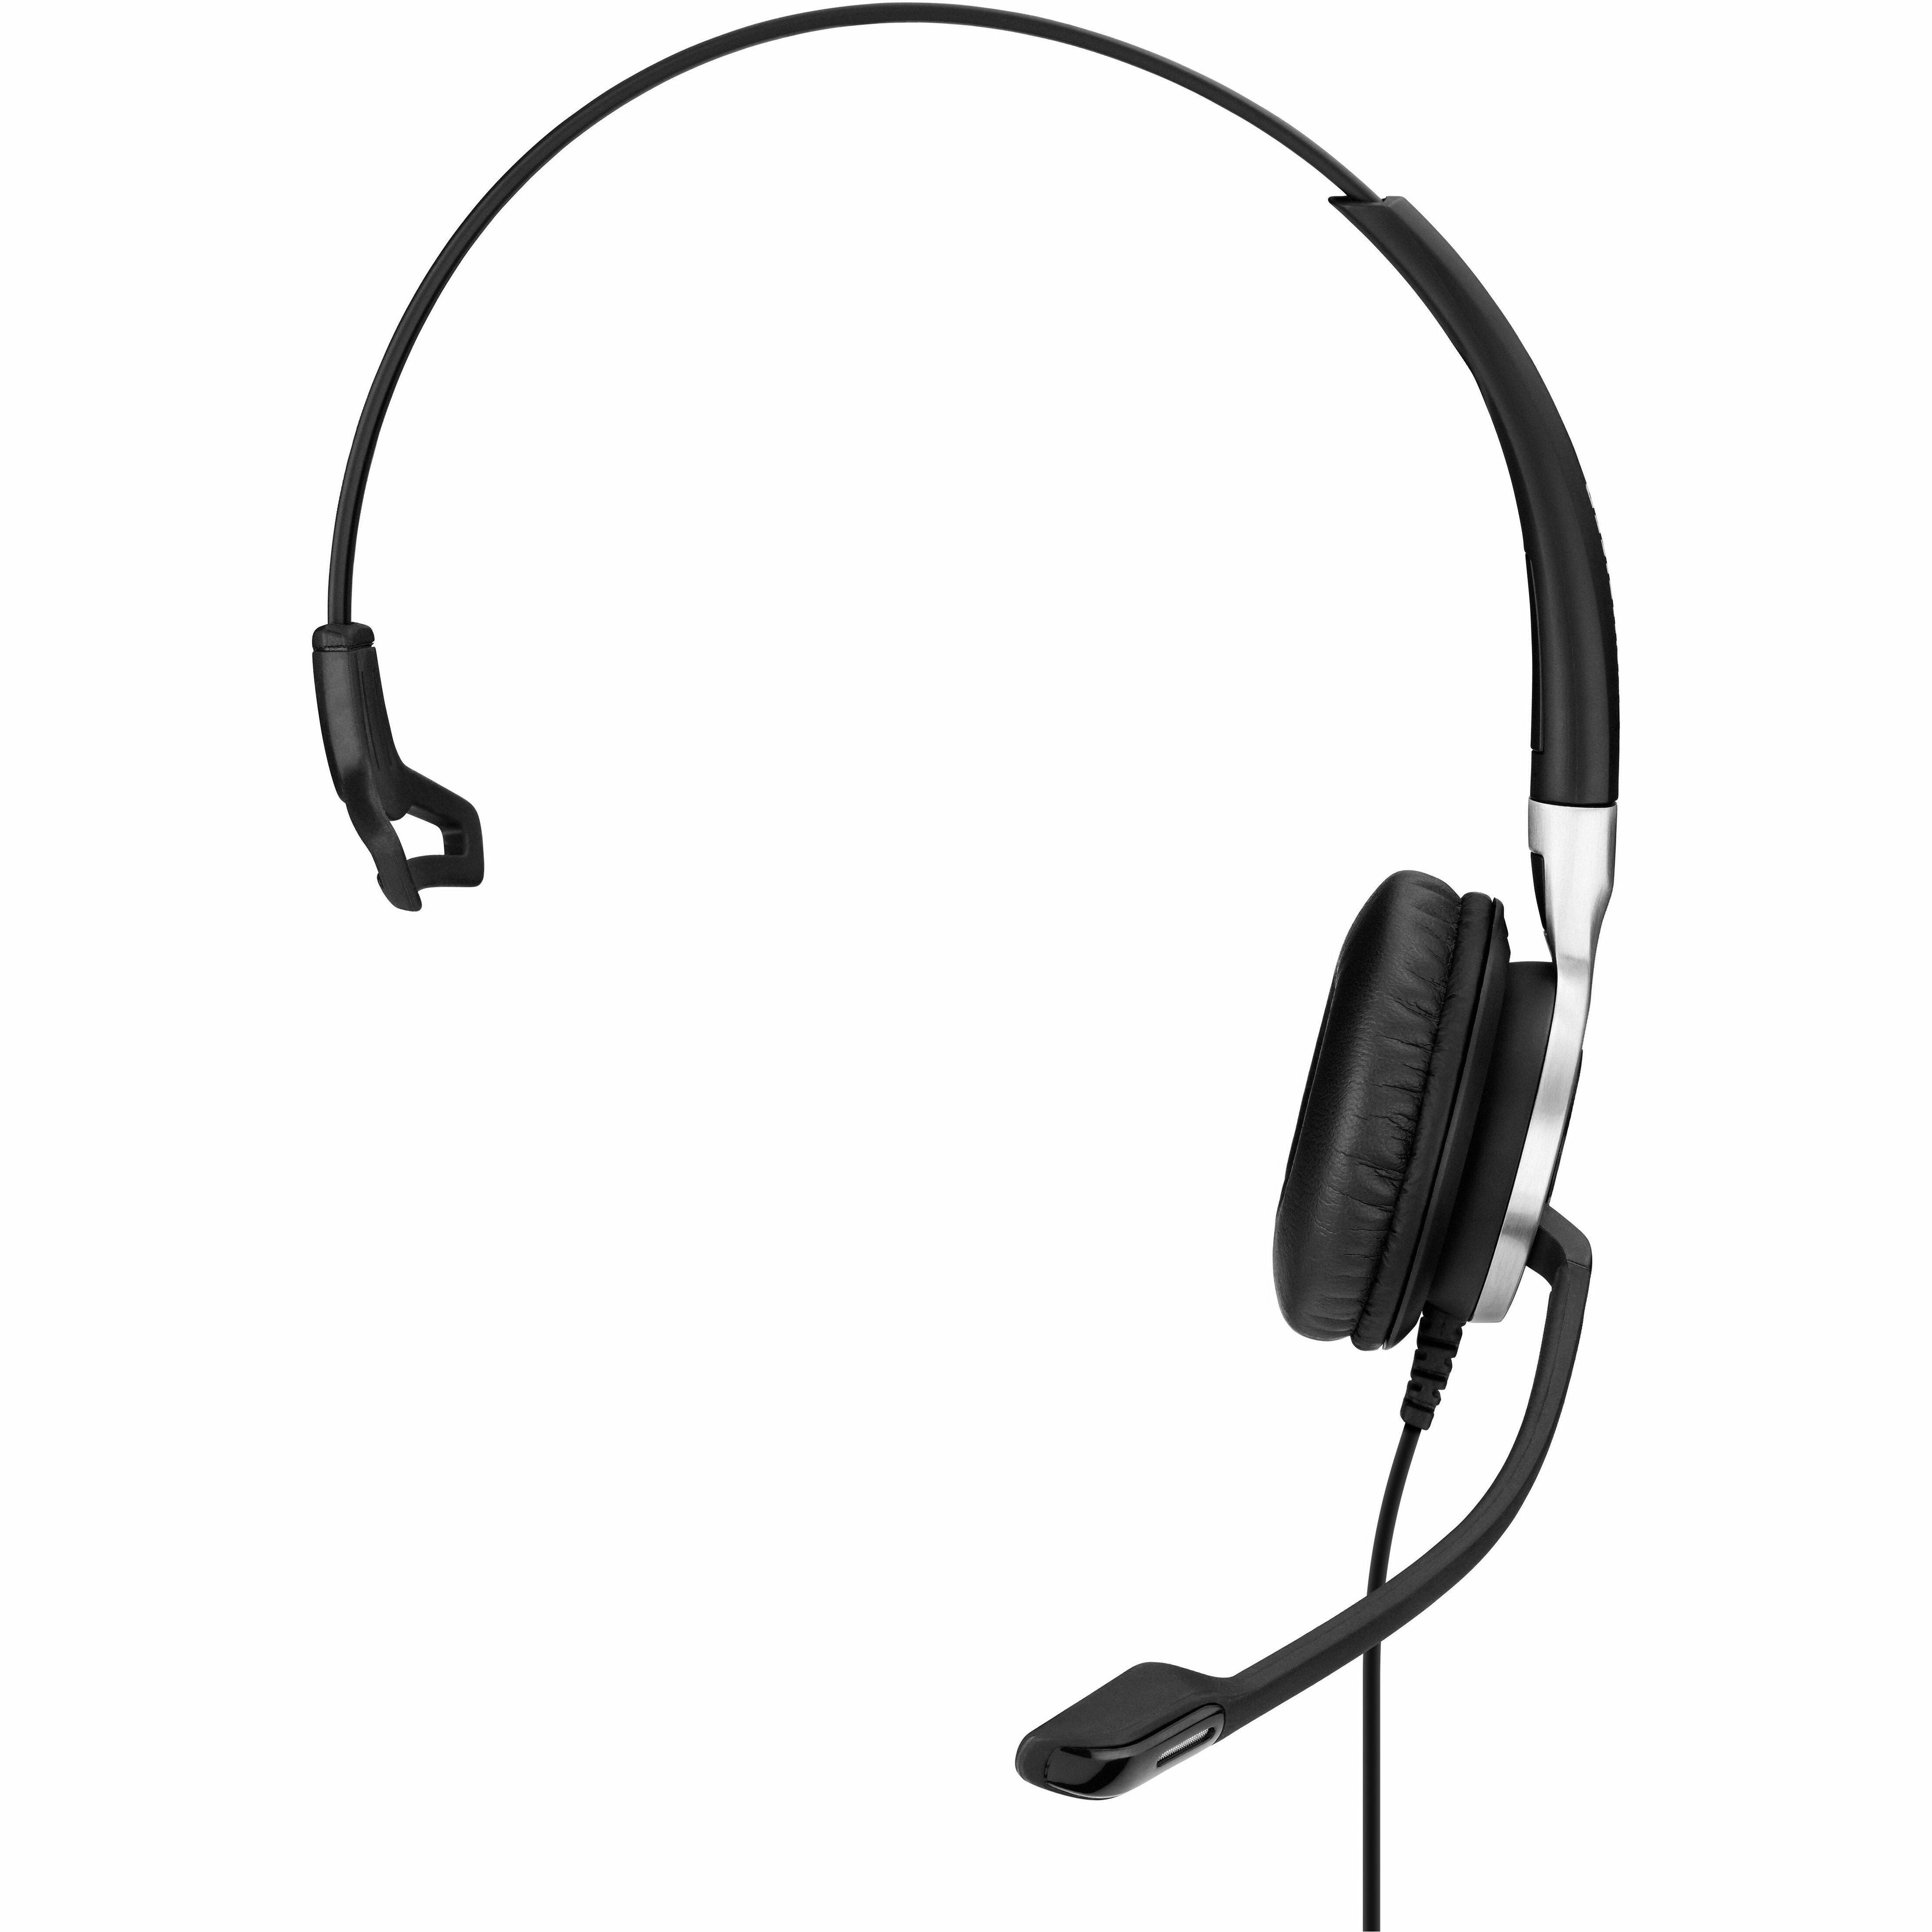 EPOS | SENNHEISER 1000554 IMPACT SC 630 Headset, Lightweight On-ear Mono Headset with Noise Cancelling Microphone